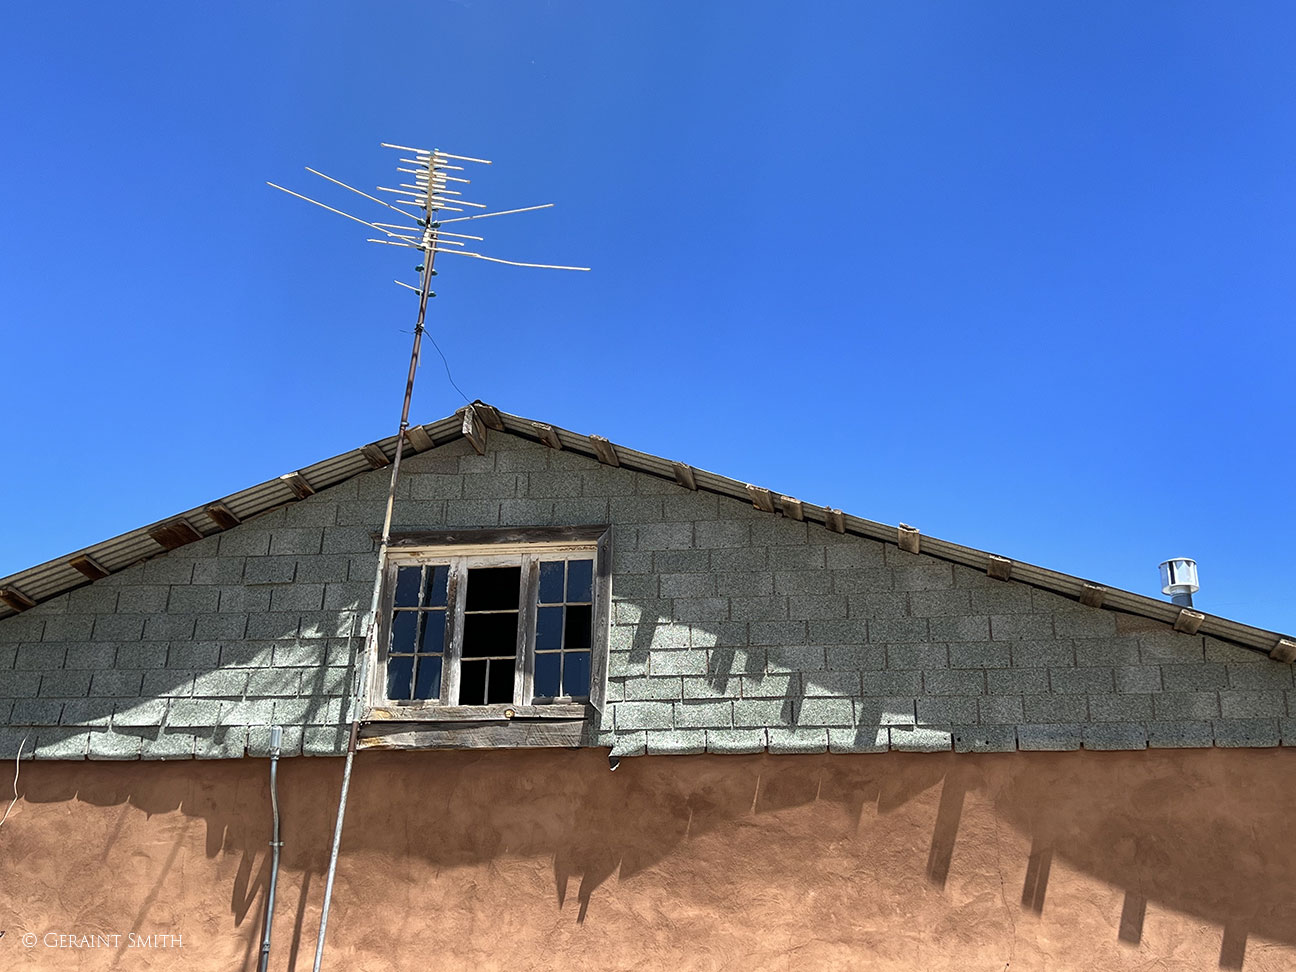 Building with TV antenna, Truchas, NM 